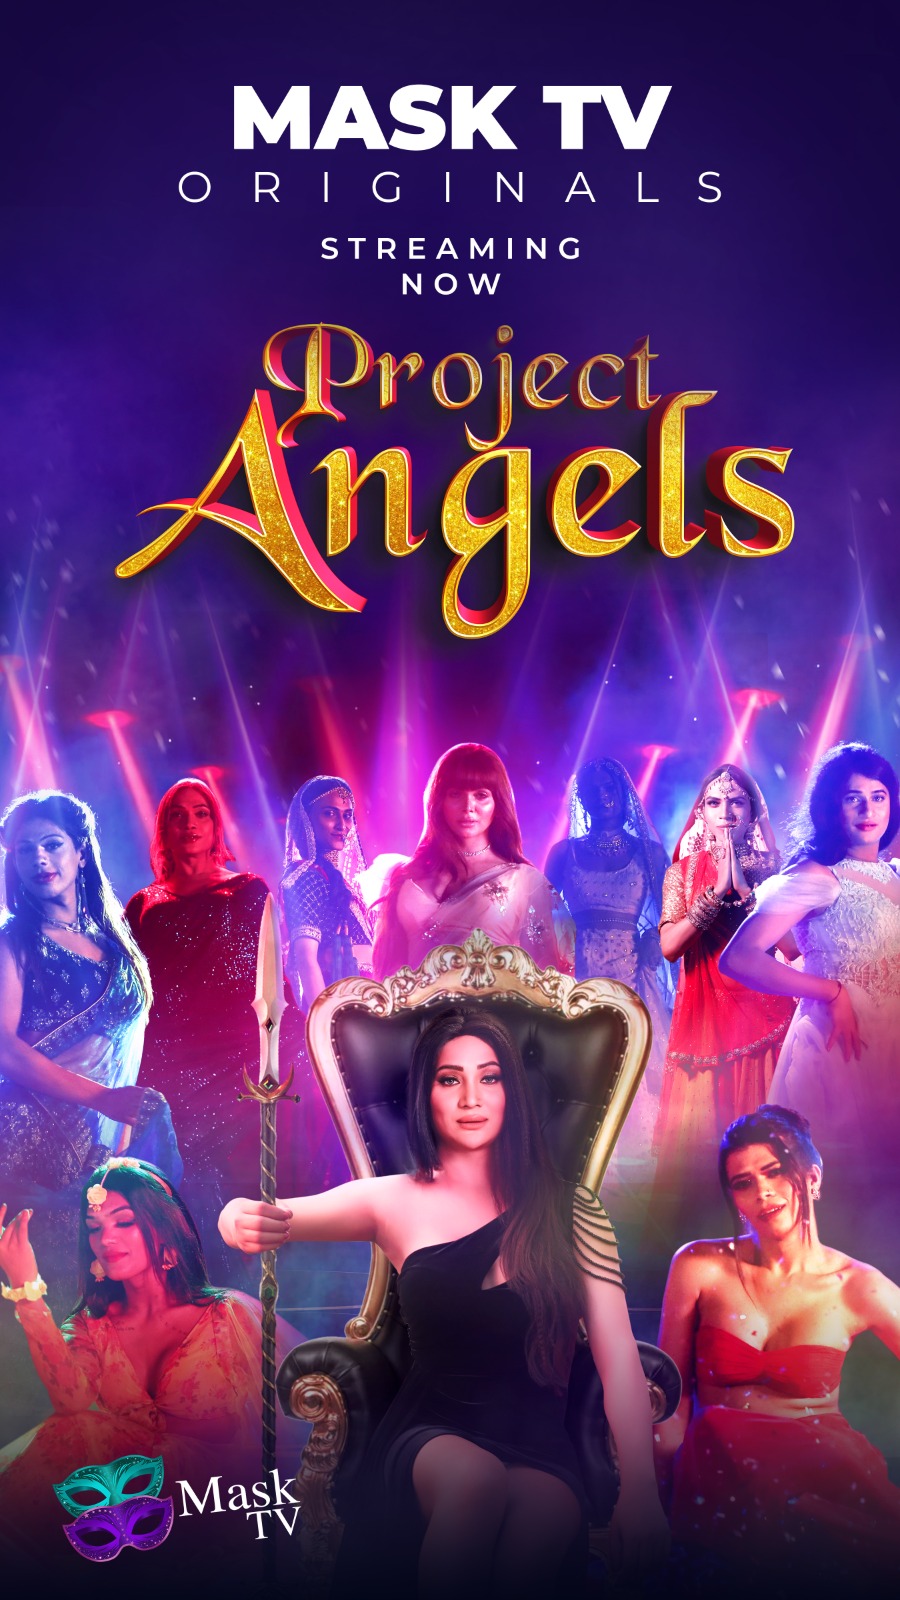 Project Angles: a real transgender show on mask tv